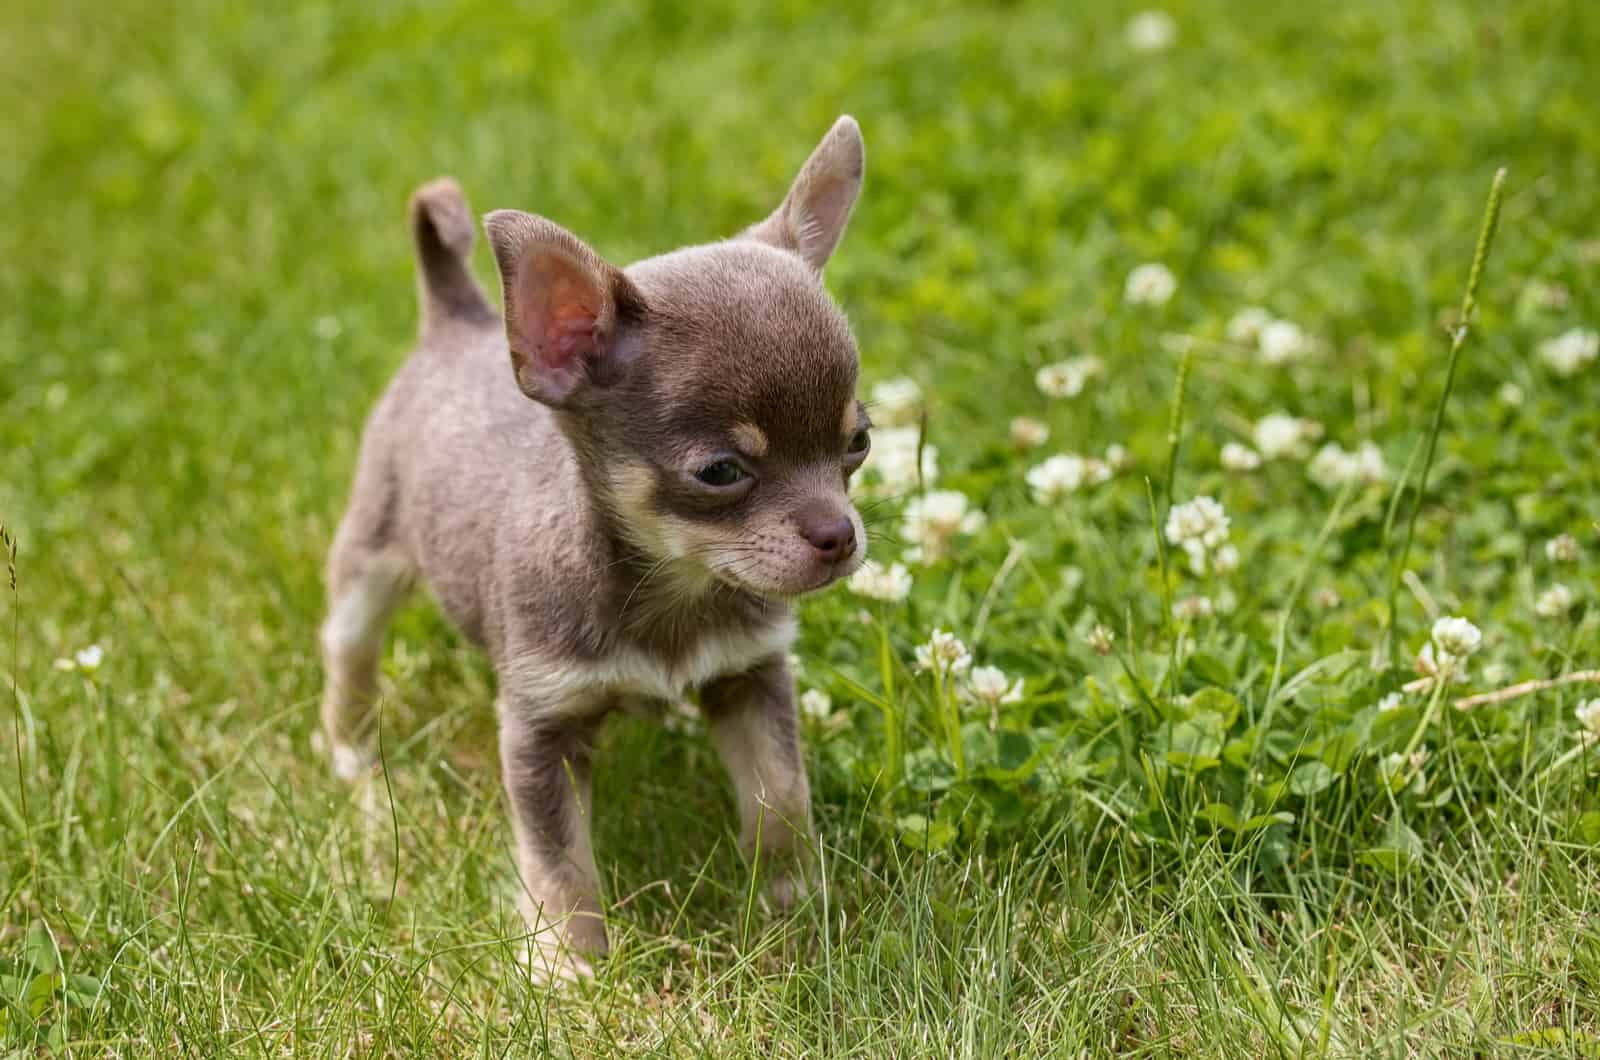 Chihuahua puppy standing on green grass